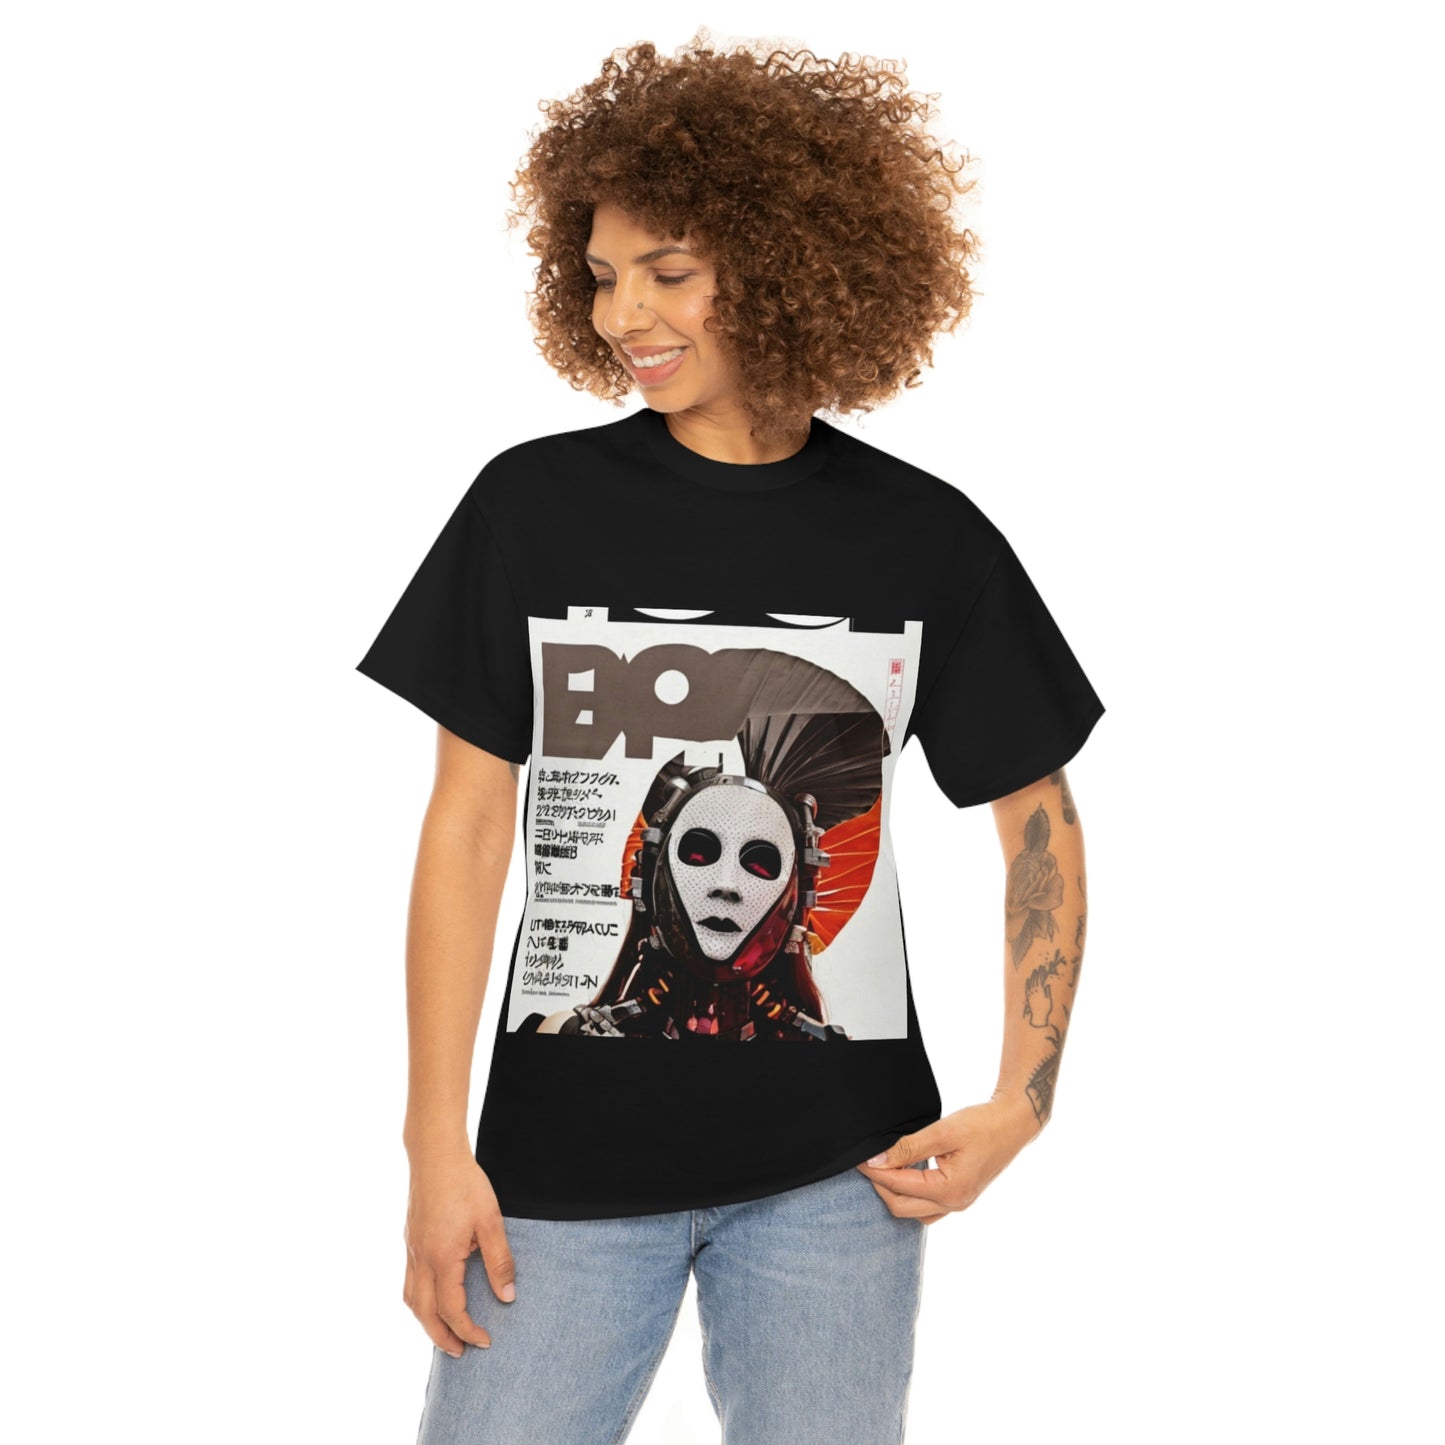 Miserable - Indigenous Dystopian Warrior  T-Shirt Collection